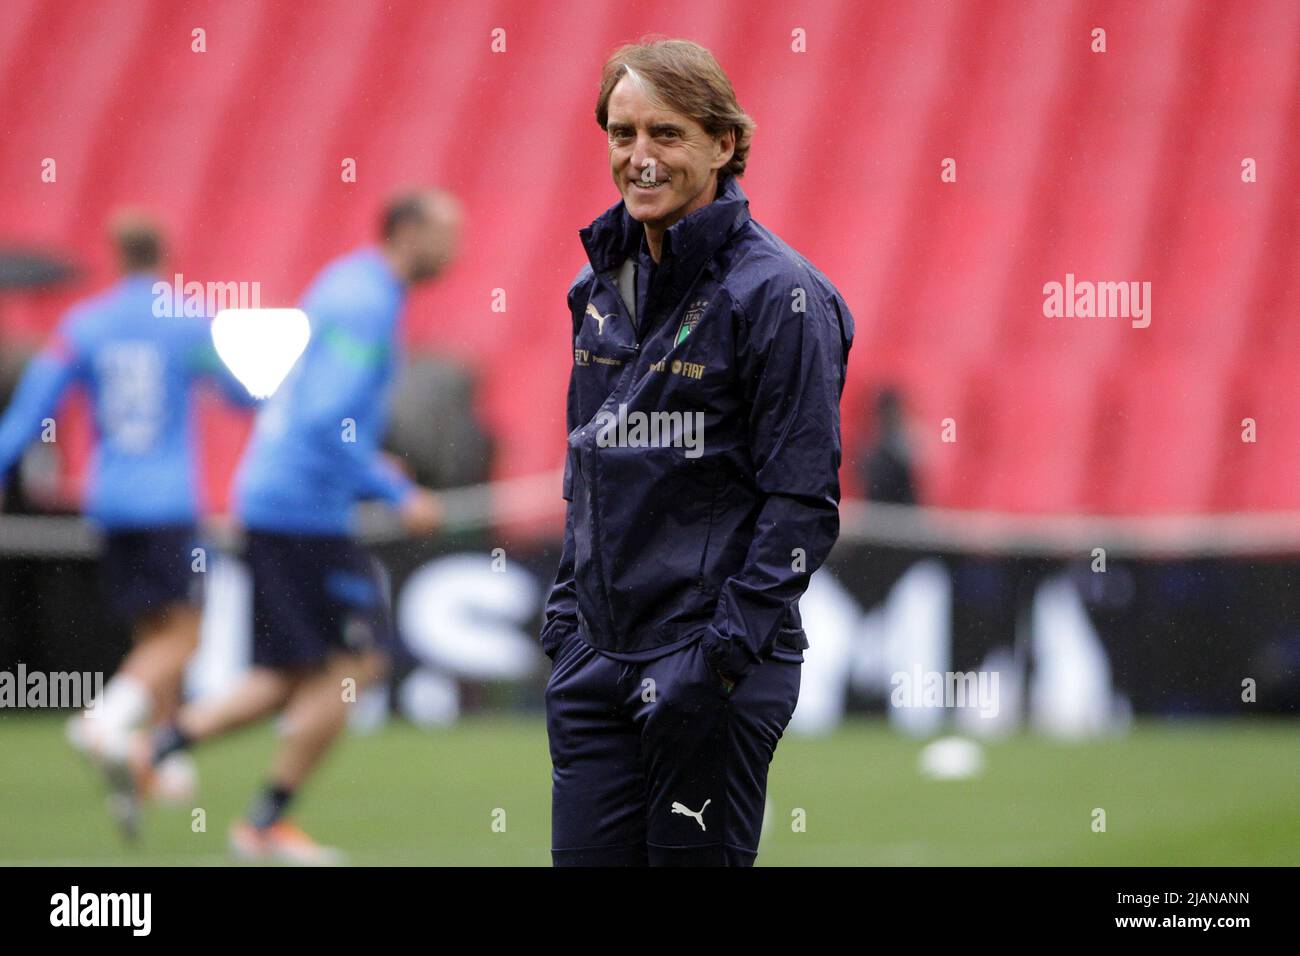 London, UK. 31st May, 2022. Roberto Mancini, the Italy football team  Manager looks on during training. Italy team training session at Wembley  Stadium on 31st May 2022 ahead of the Finalissima 2022